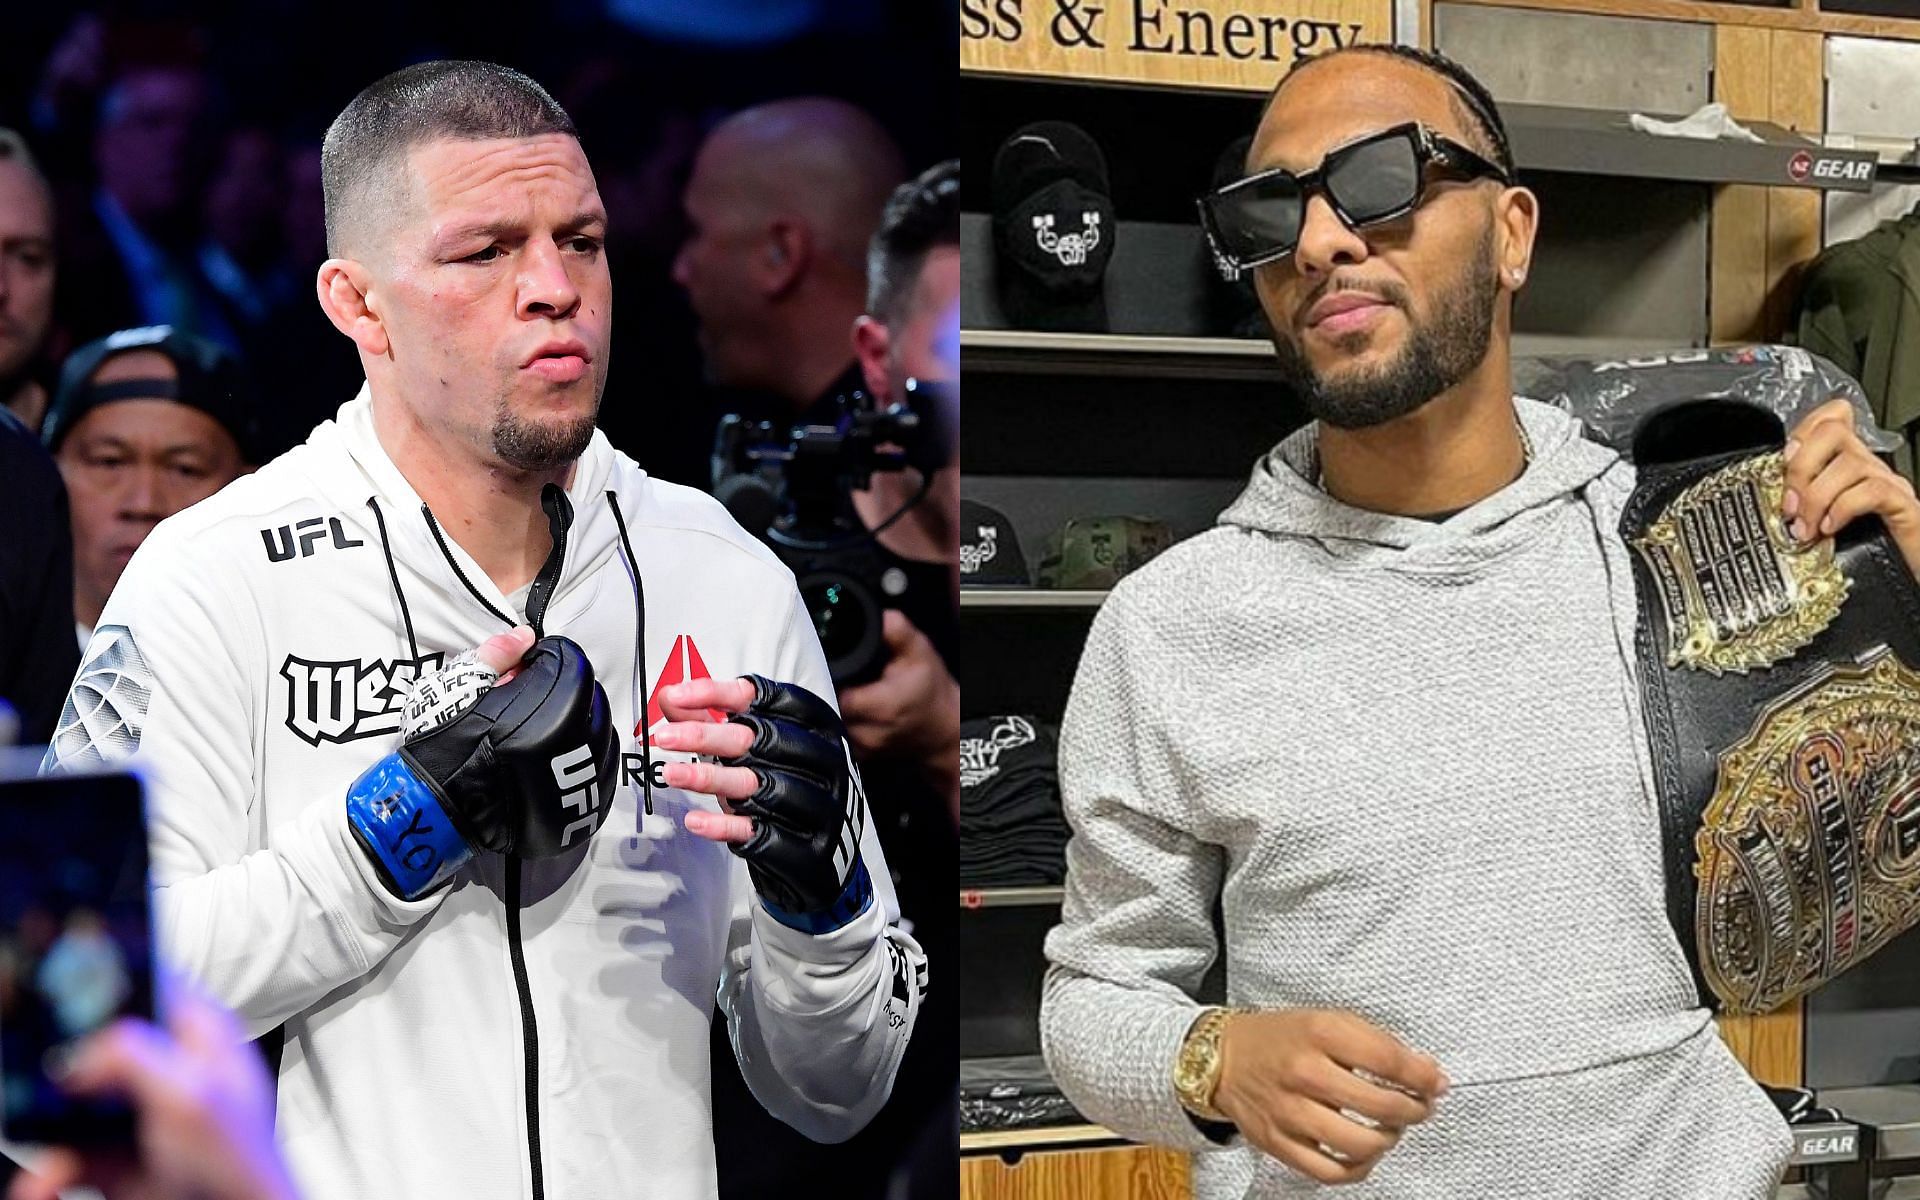 Nate Diaz (left) and A.J. McKee (right; Image Credit: @ajmckee101 on Instagram)